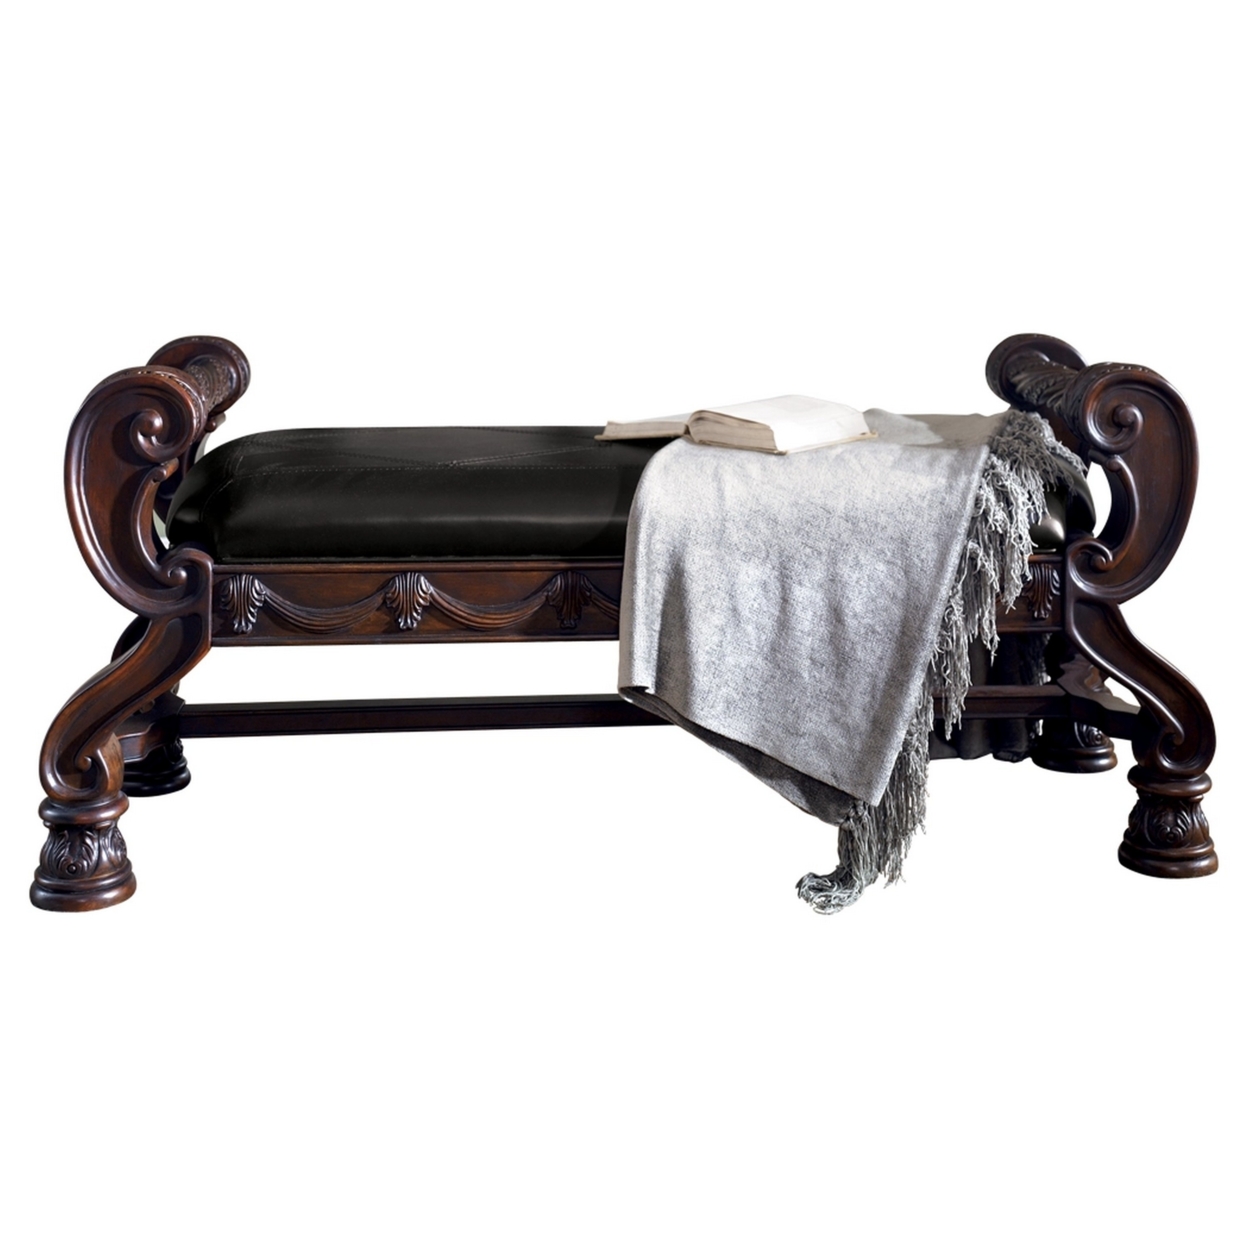 Traditional Bench With Rolled Arms And Ornate Carved Details, Brown- Saltoro Sherpi